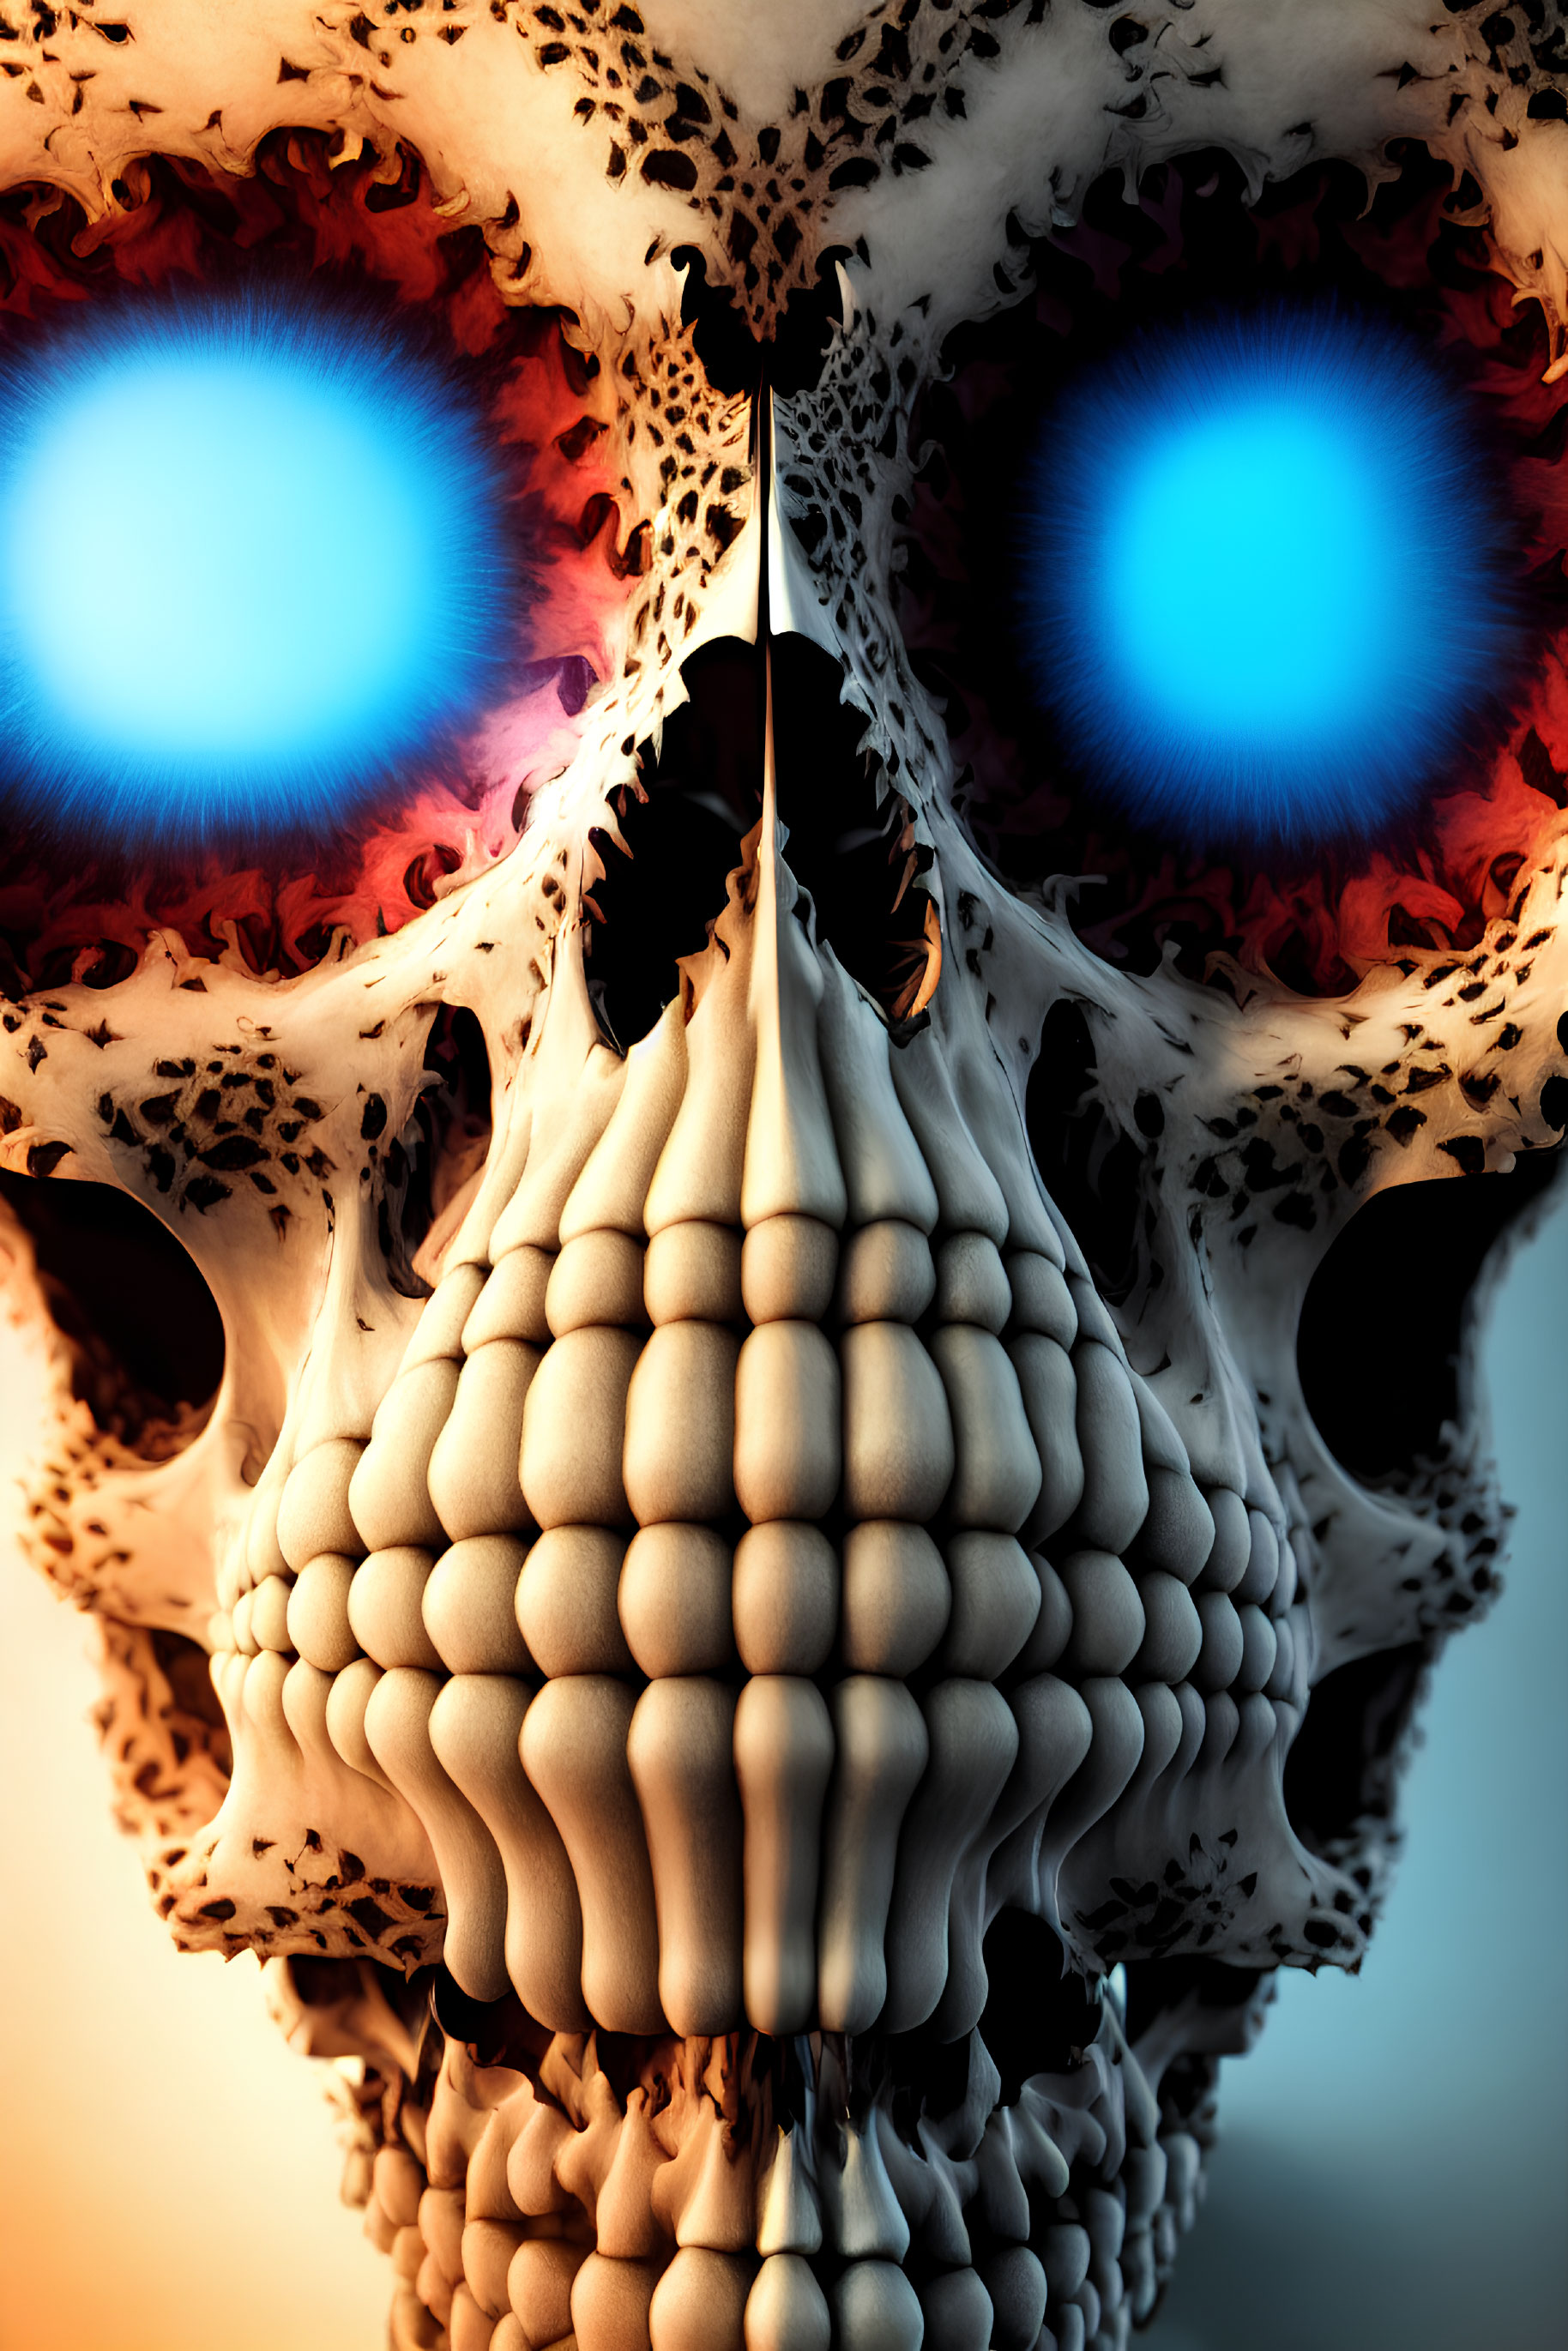 Surreal digital artwork: skull with blue eyes and intricate textures